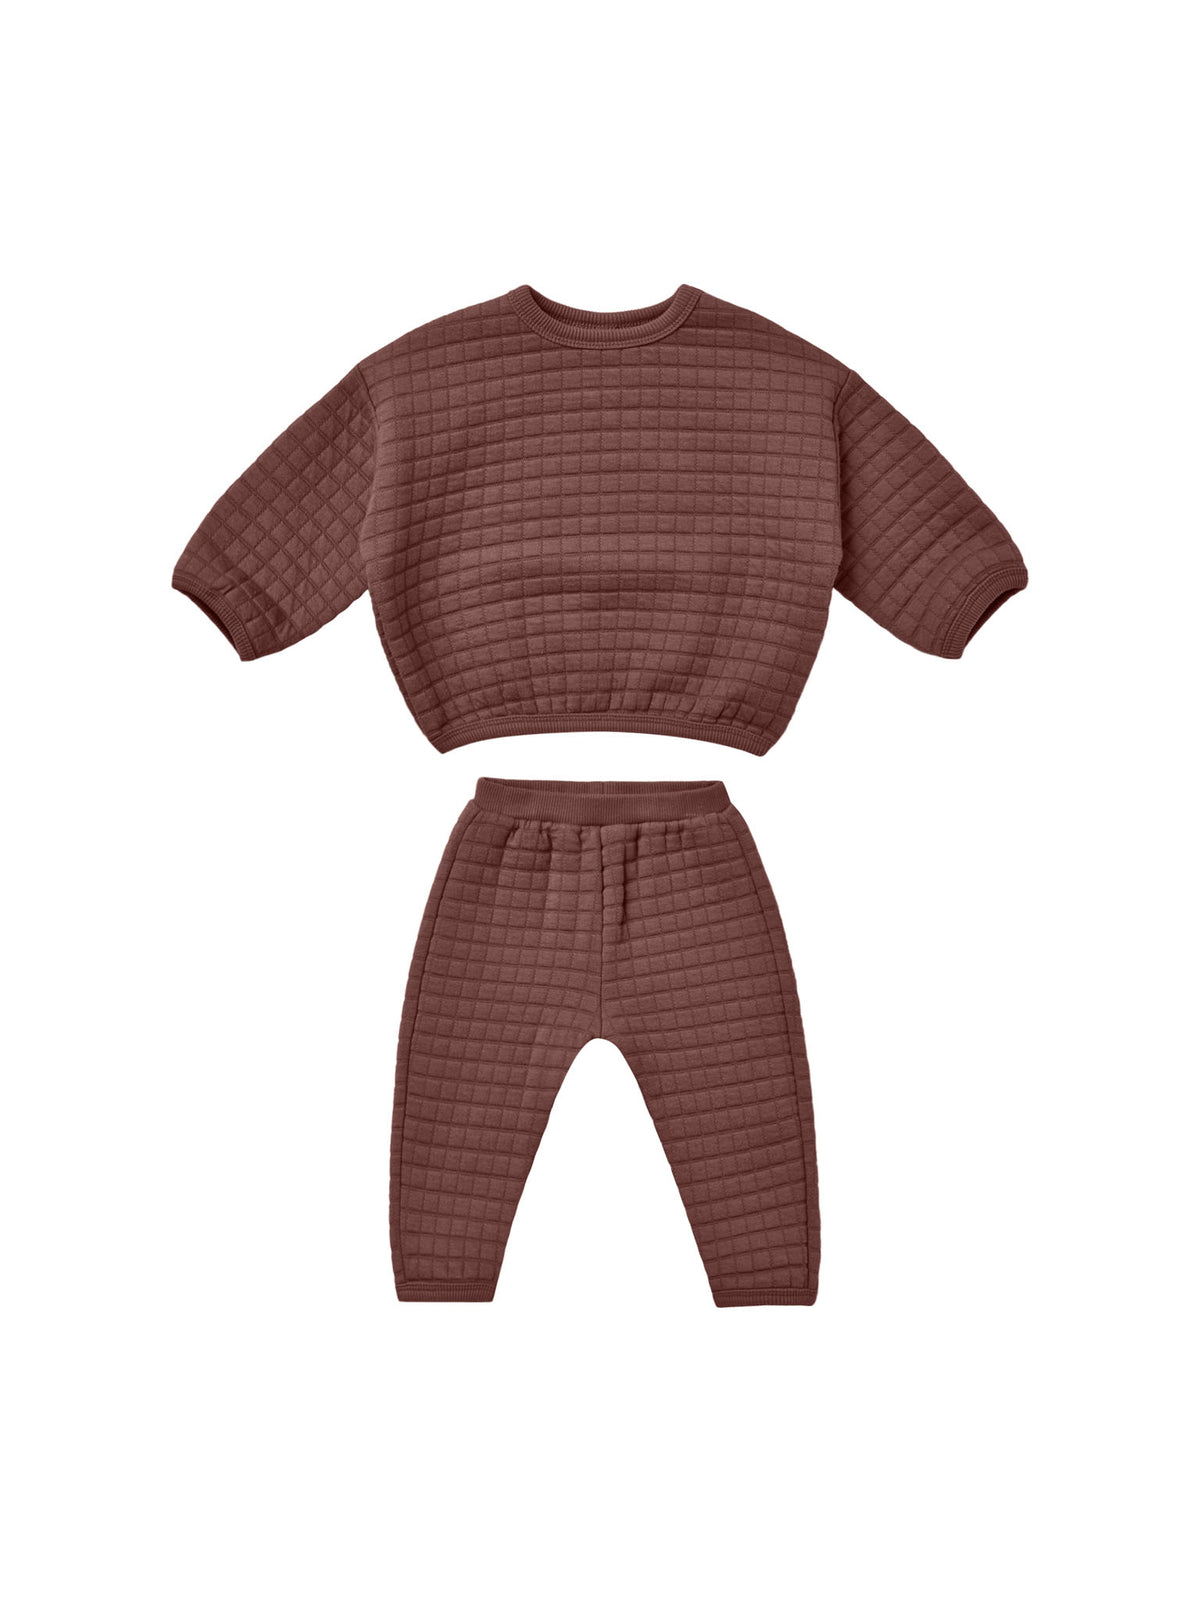 QUILTED SWEATER + PANT SET || PLUM